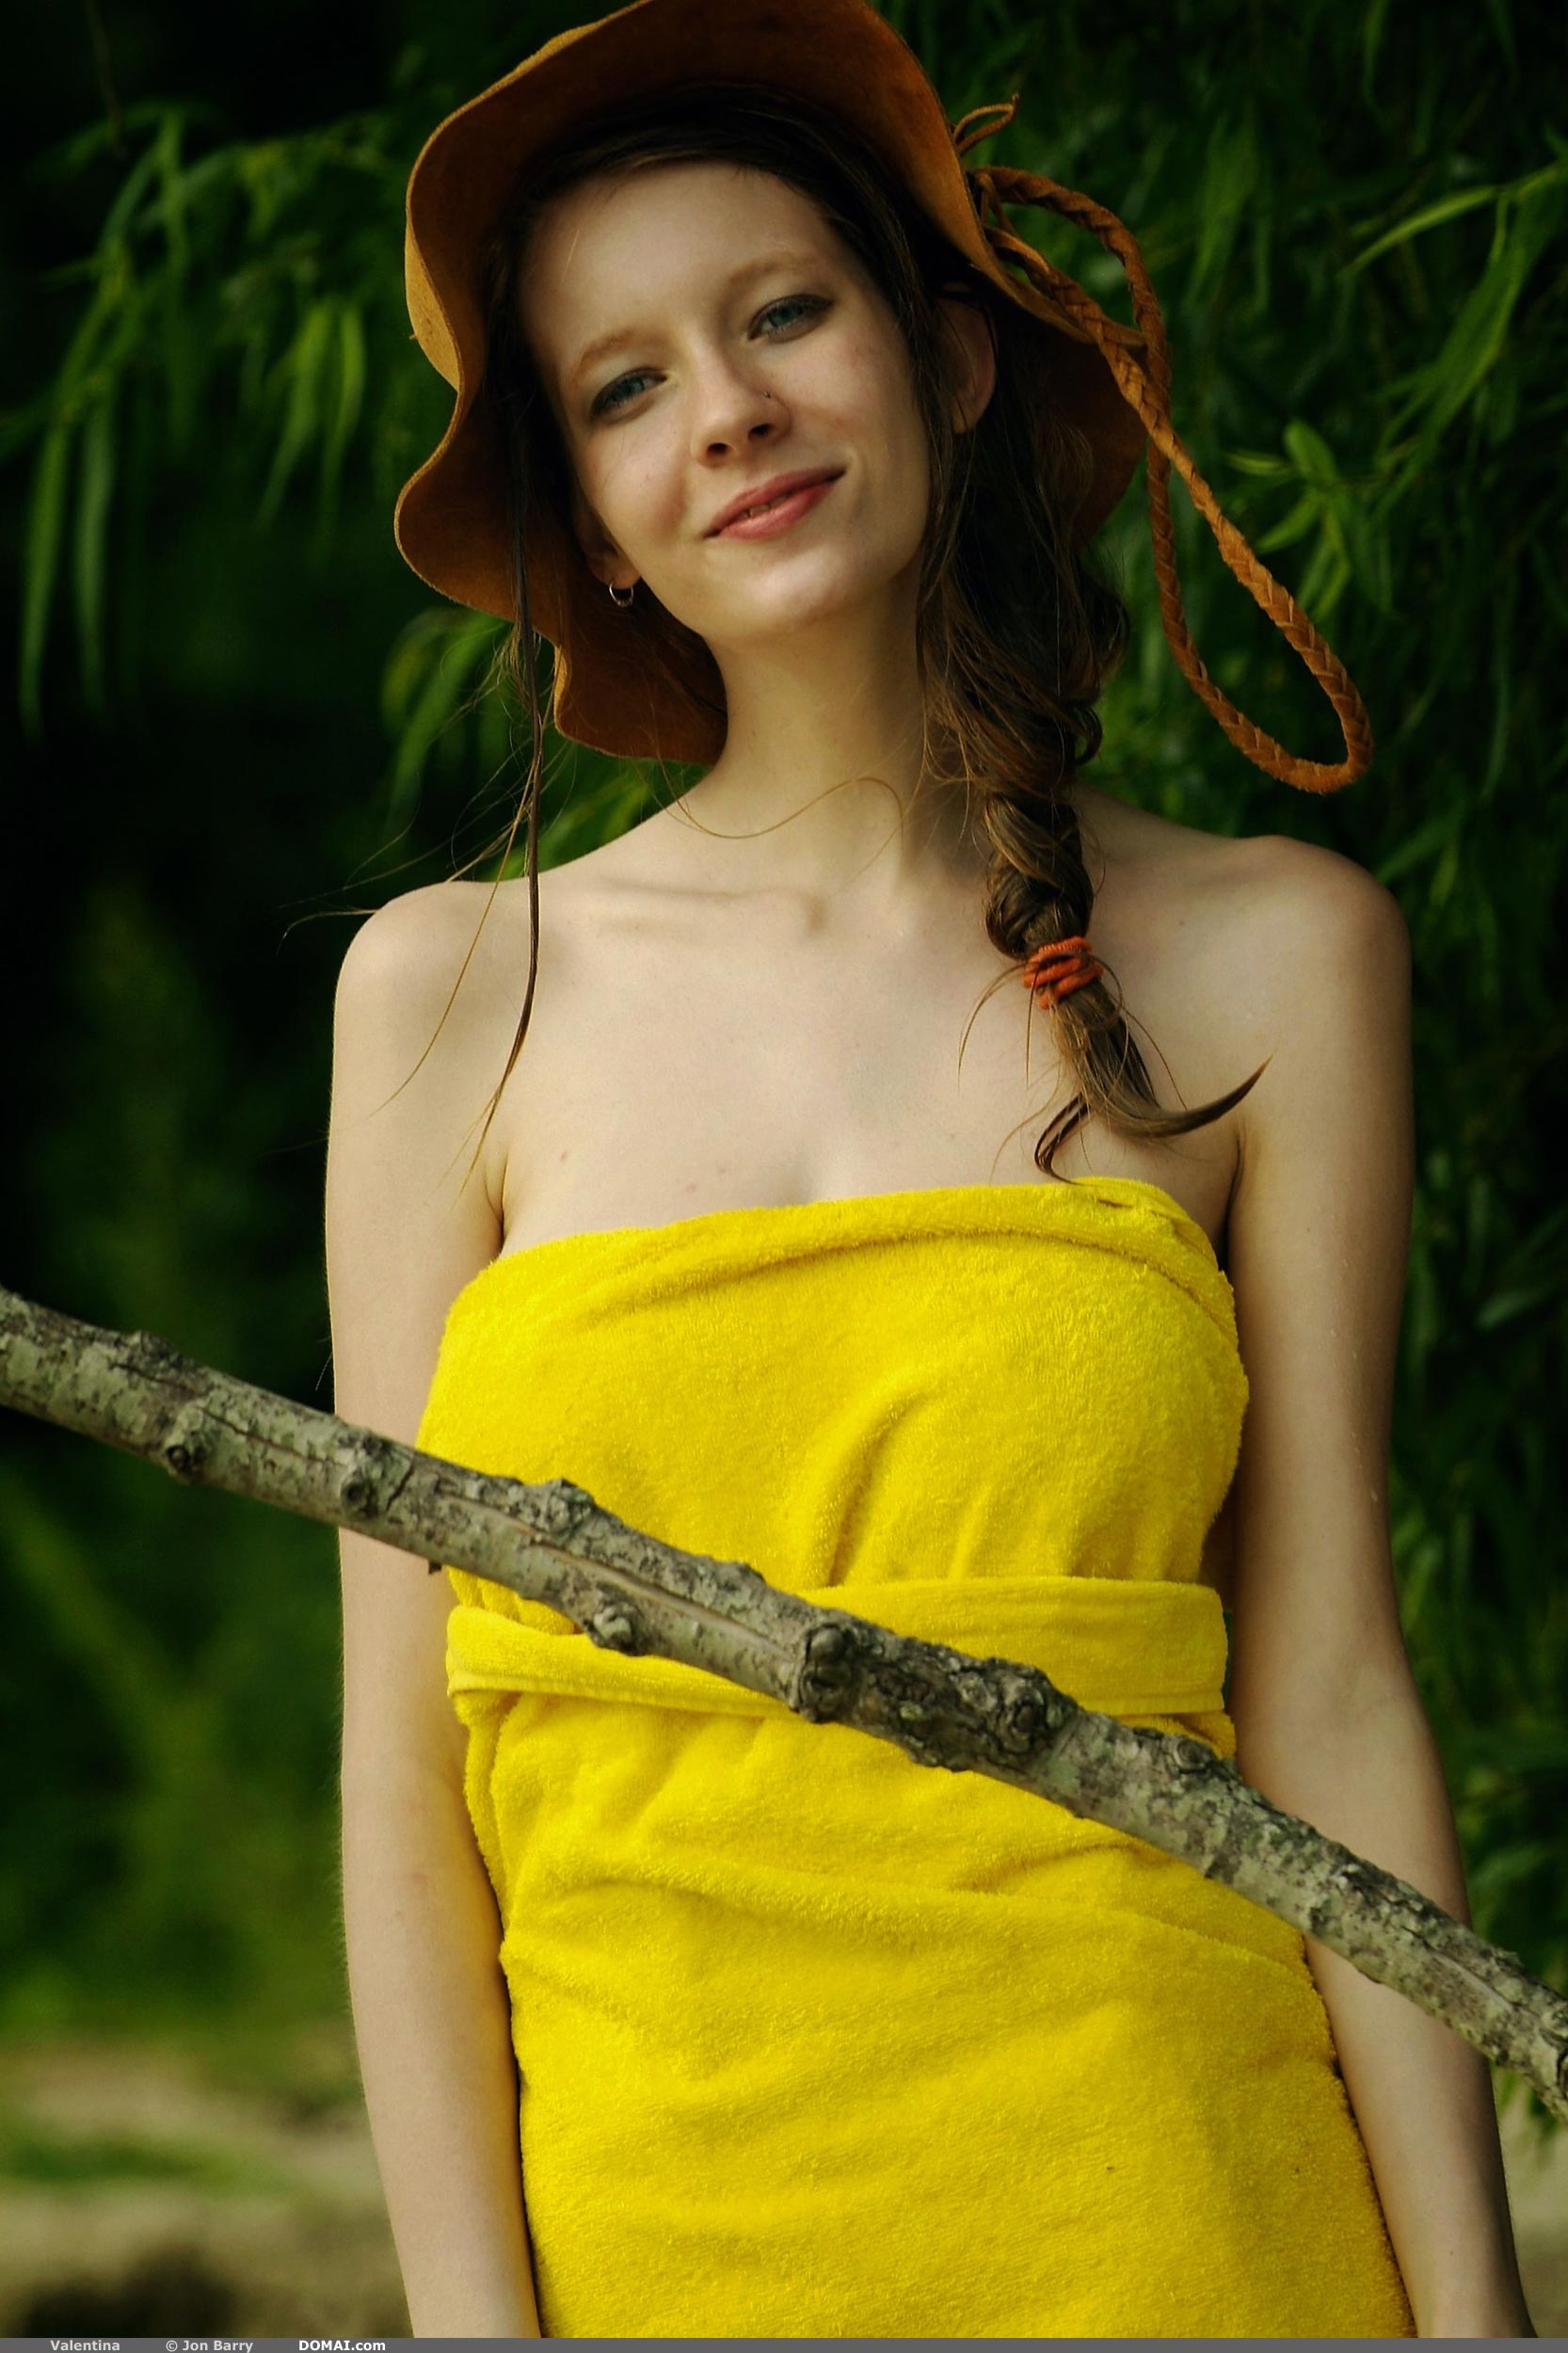 Skinny Pale Hairy Babe Mandi Collins With Big Tits From Domai Wearing Hat In Forest Tgp